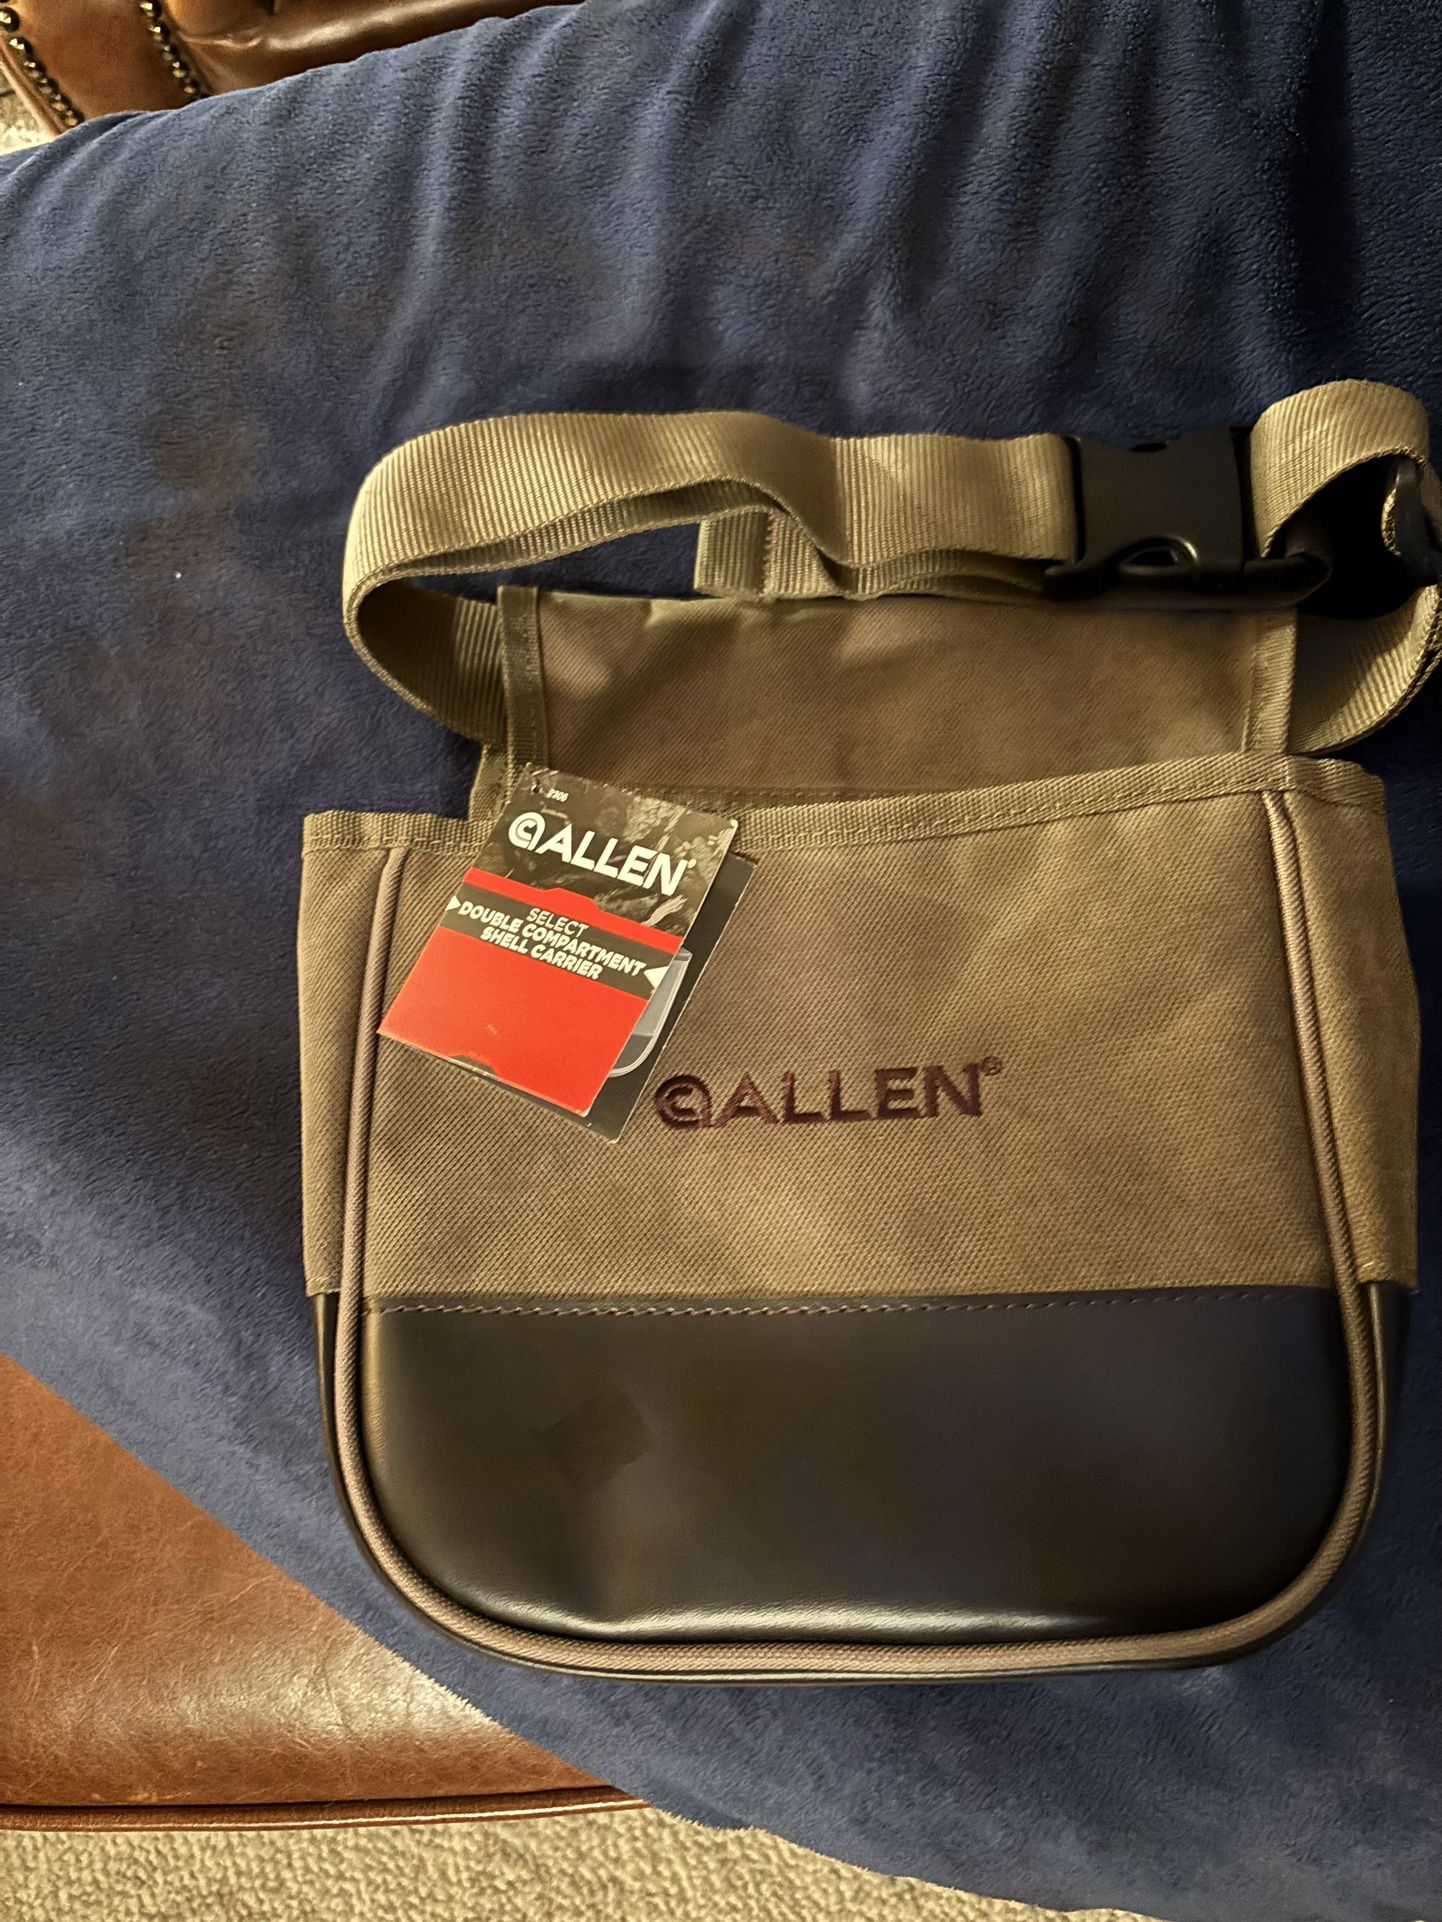 Allen Double Compartment Shell Carrier